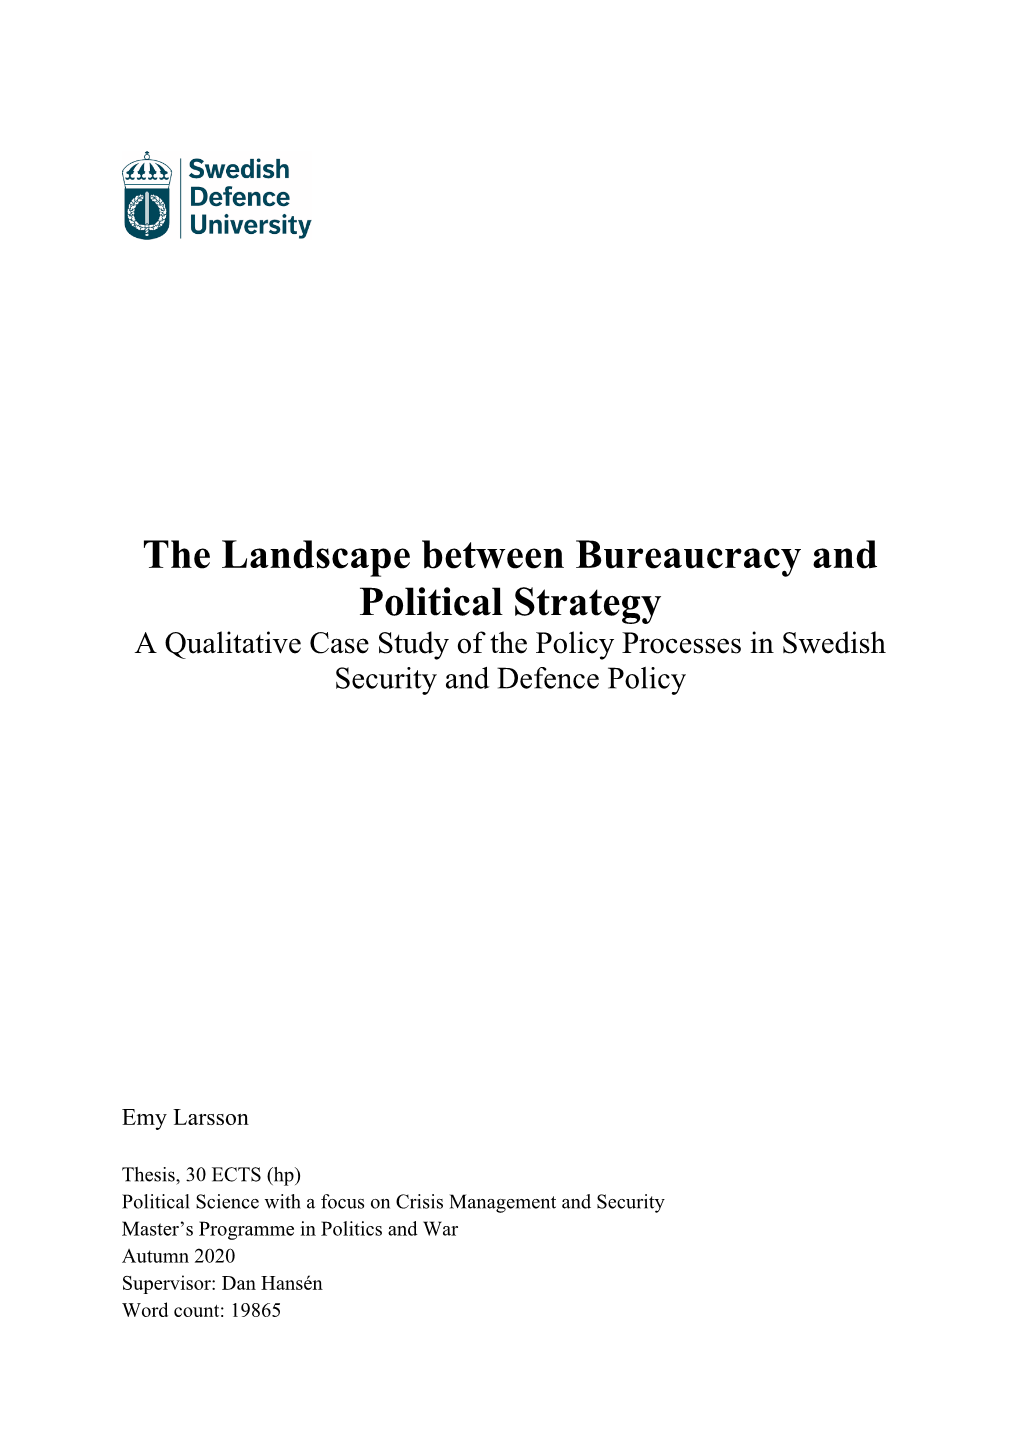 The Landscape Between Bureaucracy and Political Strategy a Qualitative Case Study of the Policy Processes in Swedish Security and Defence Policy